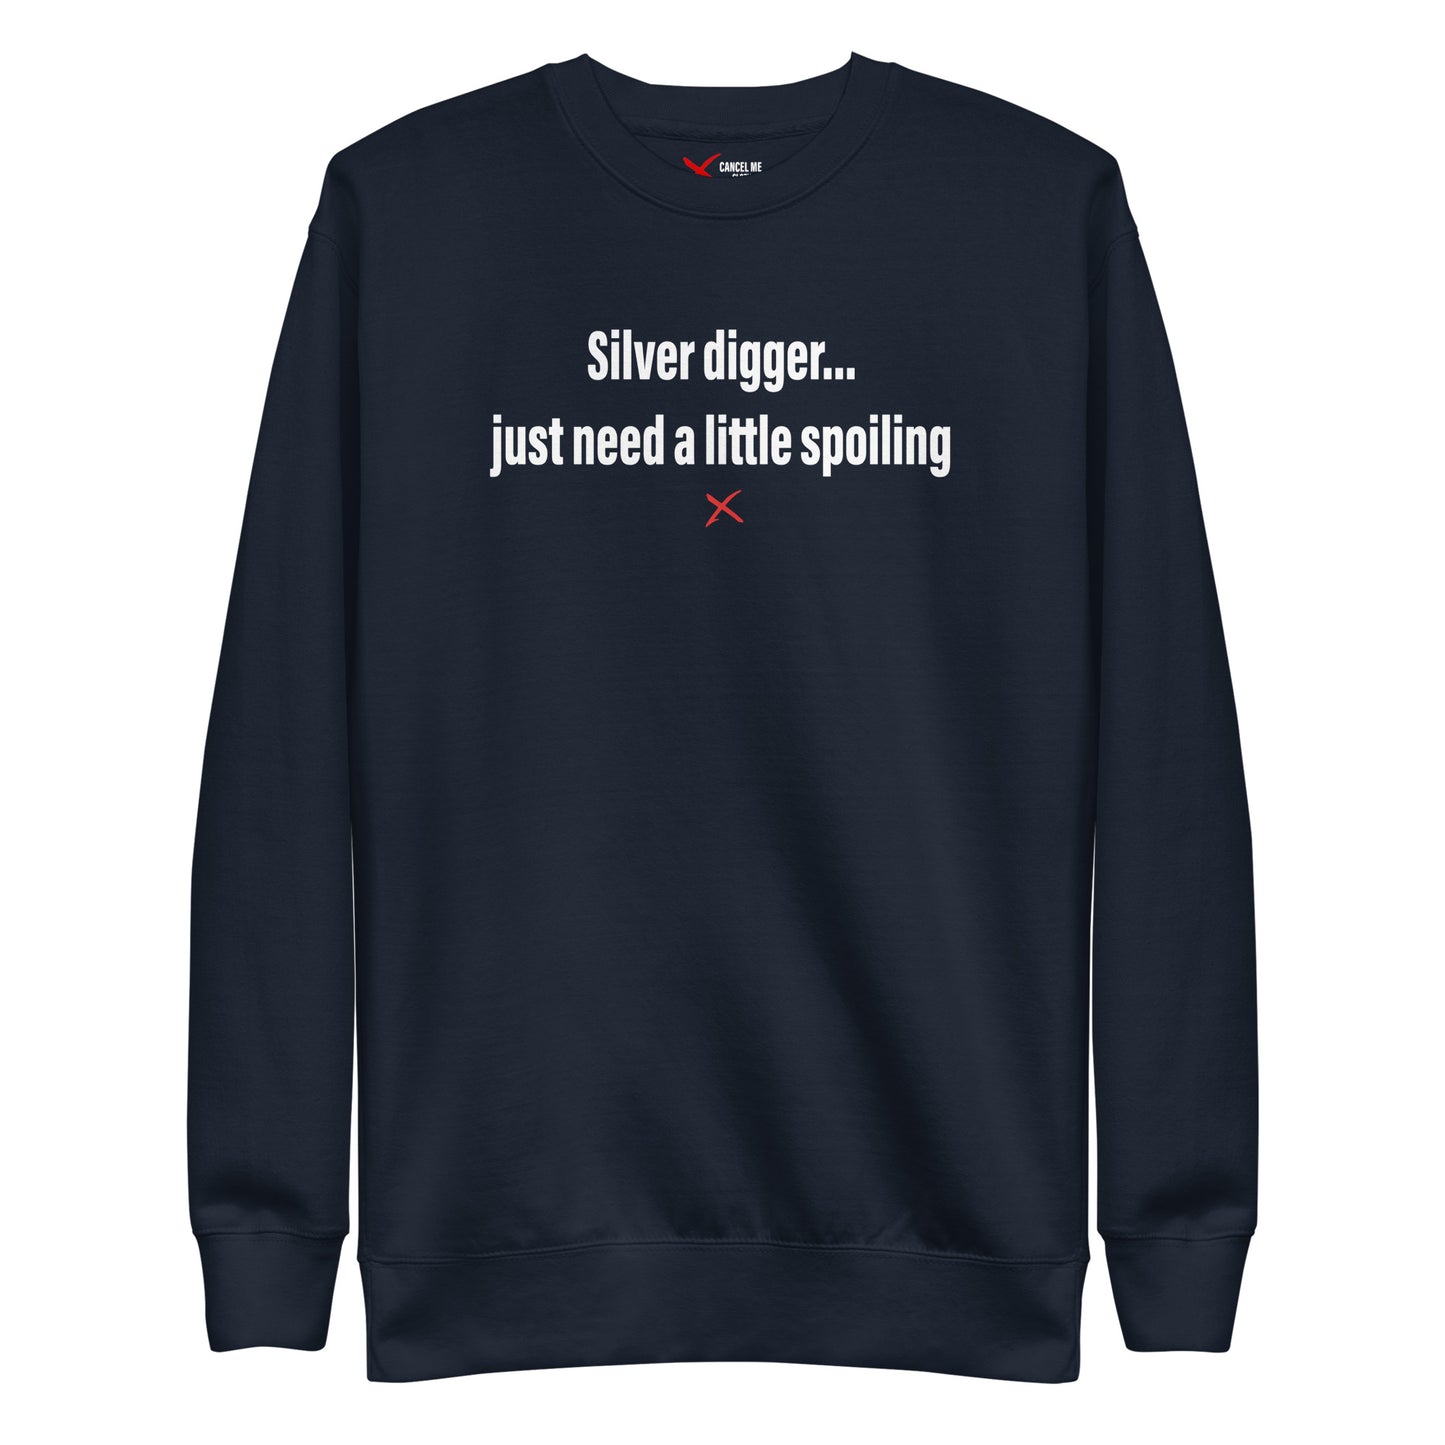 Silver digger... just need a little spoiling - Sweatshirt